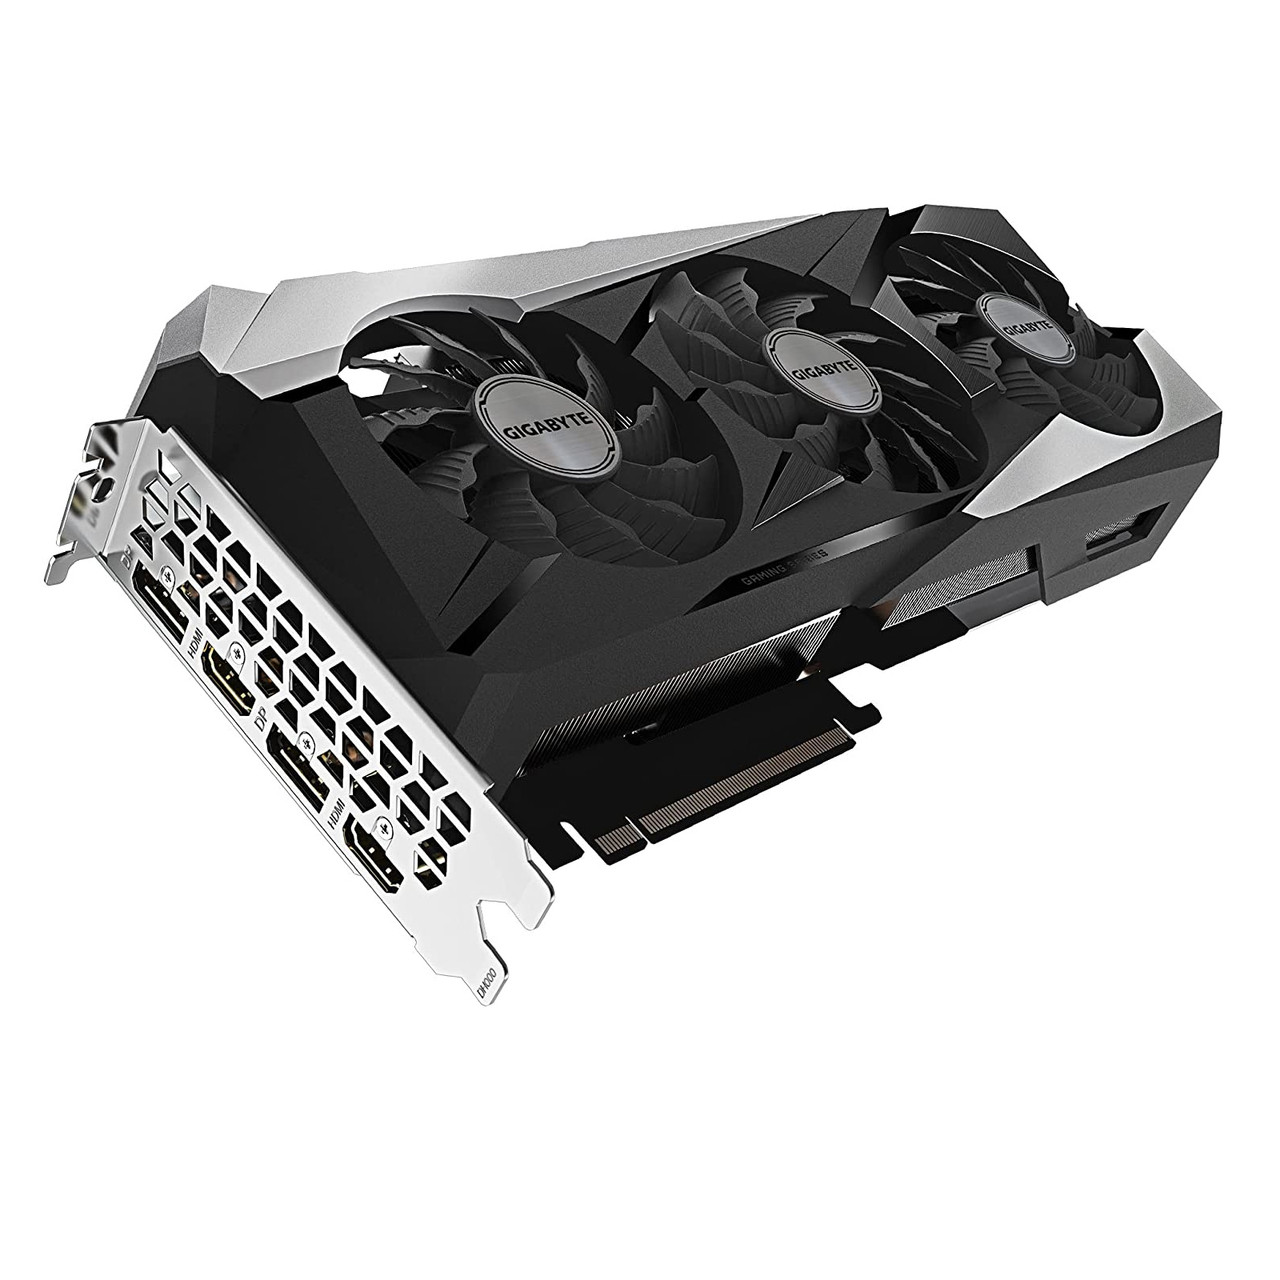 Gigabyte GV-N307TGAMING OC-8GD GeForce RTX 3070 Ti Gaming OC 8G Graphics Card, 8GB 256-bit GDDR6X Video Card with Graphics Card Support Bracket (Silver)